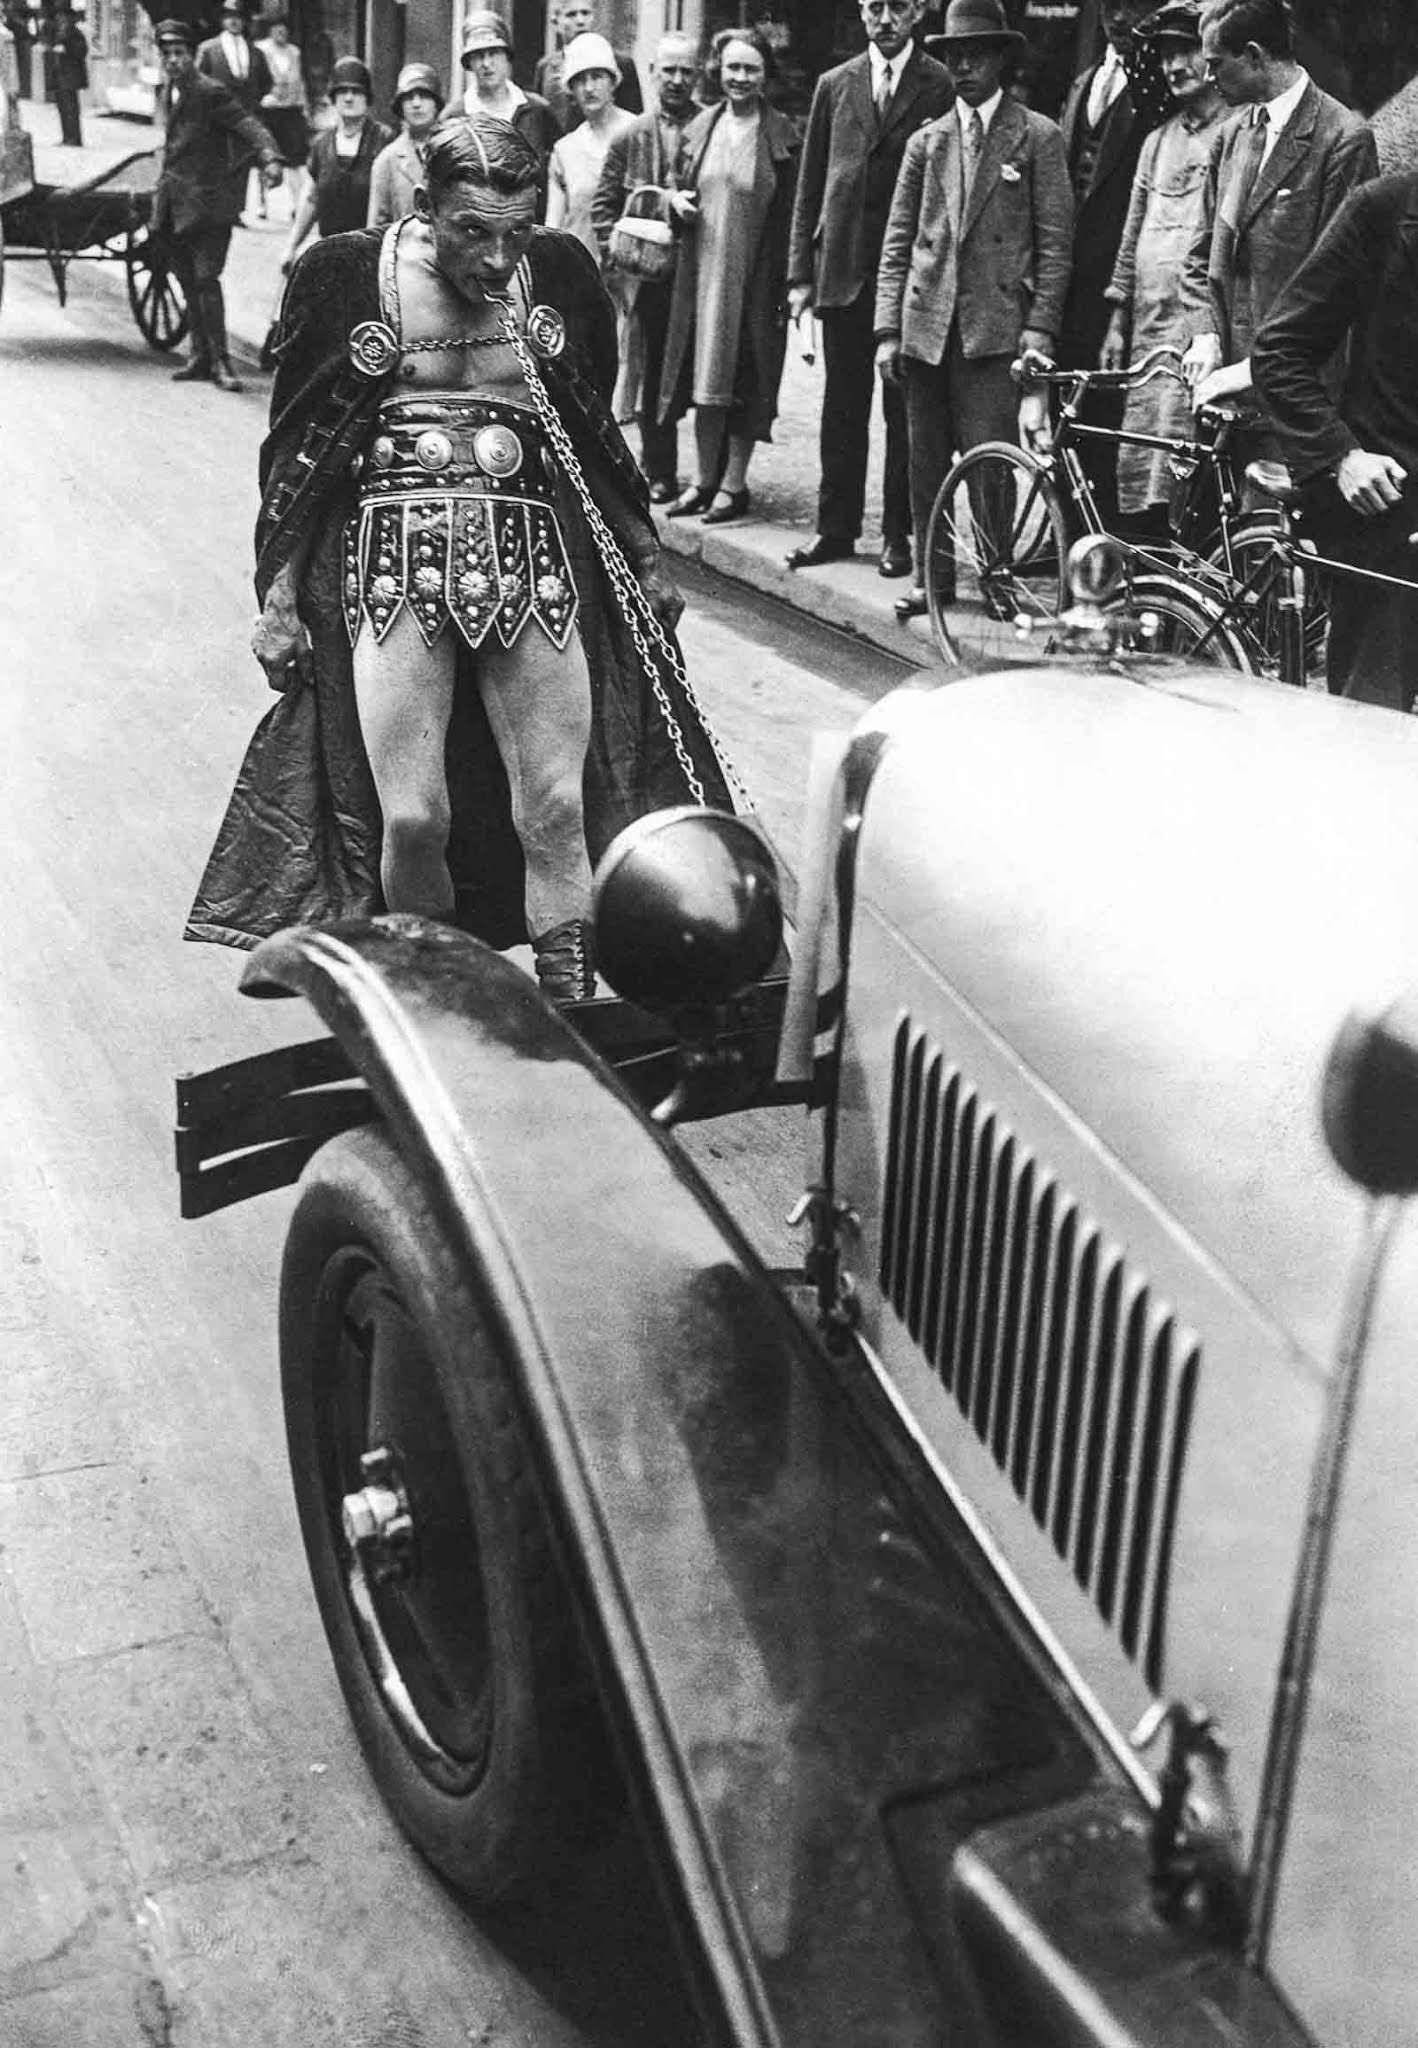 Circus strongman Stefan demonstrates his strength by towing a motorcar with his teeth through the streets of Berlin, 1925.